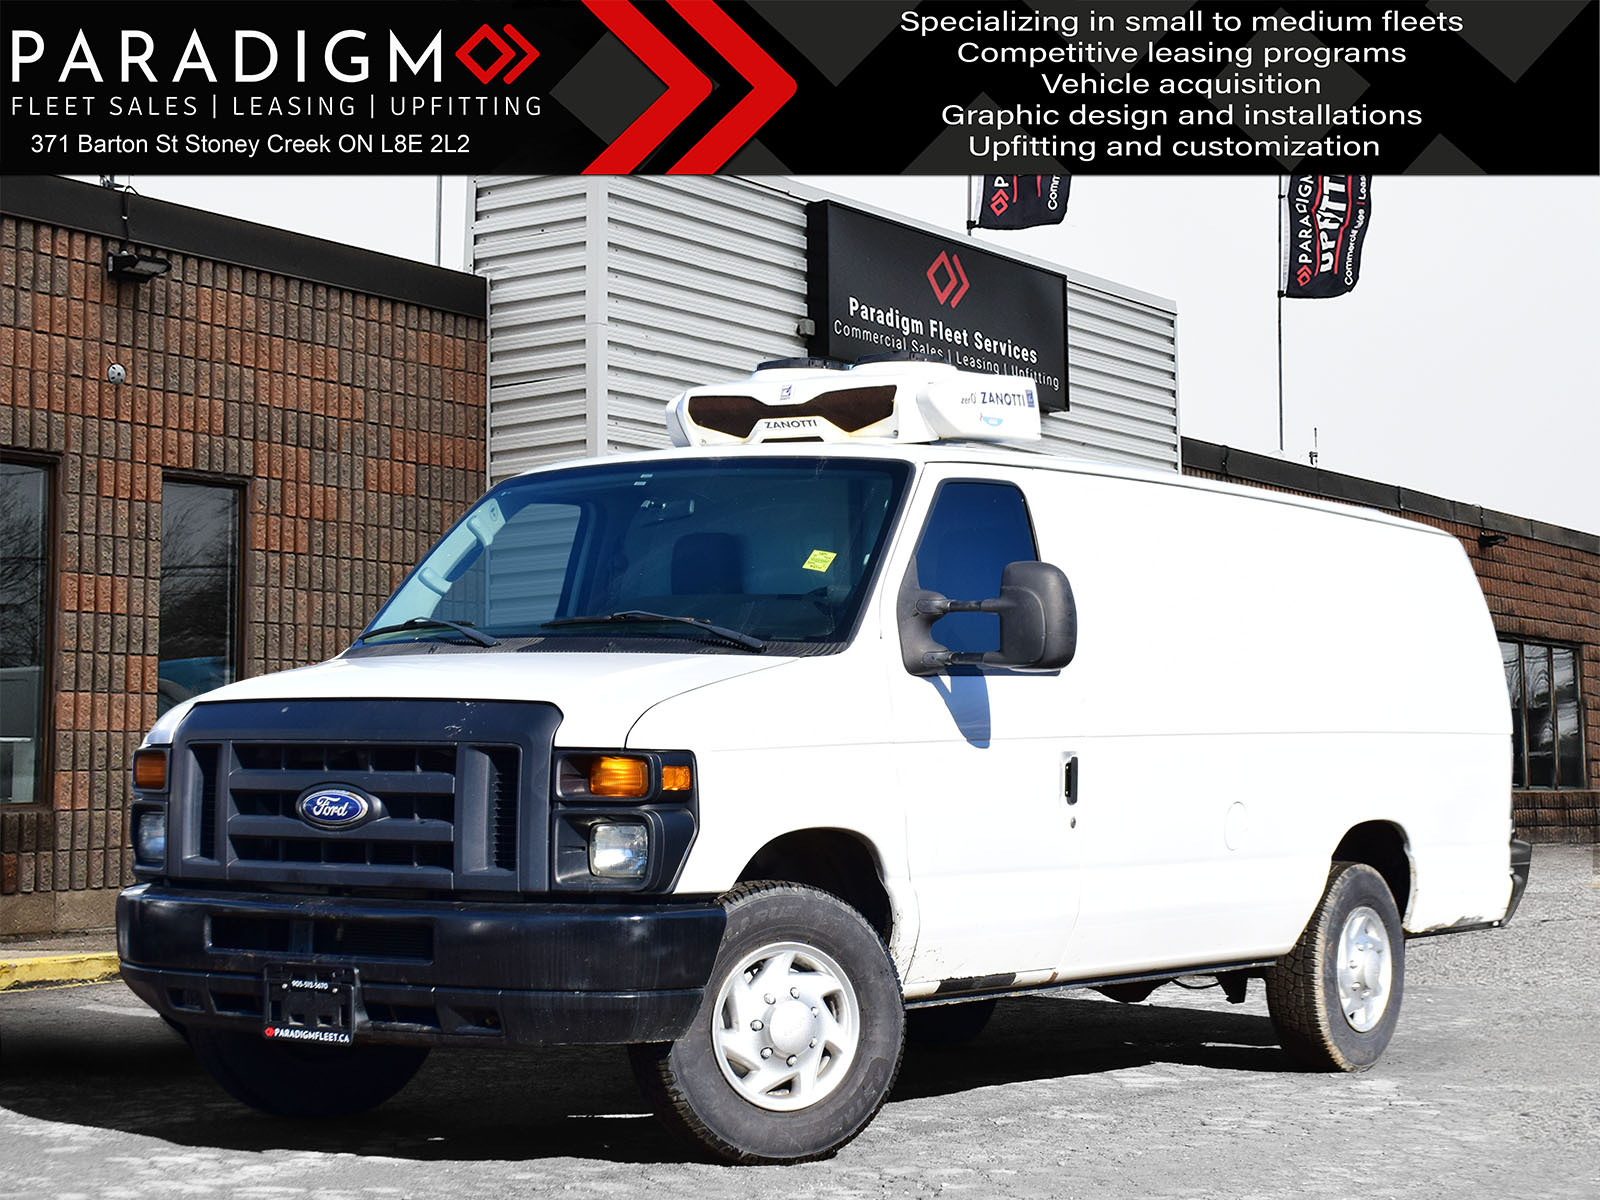 2014 Ford E-Series Cargo Van 138-Inch WB Low Roof Reefer Van 5.4L V8 *AS IS*